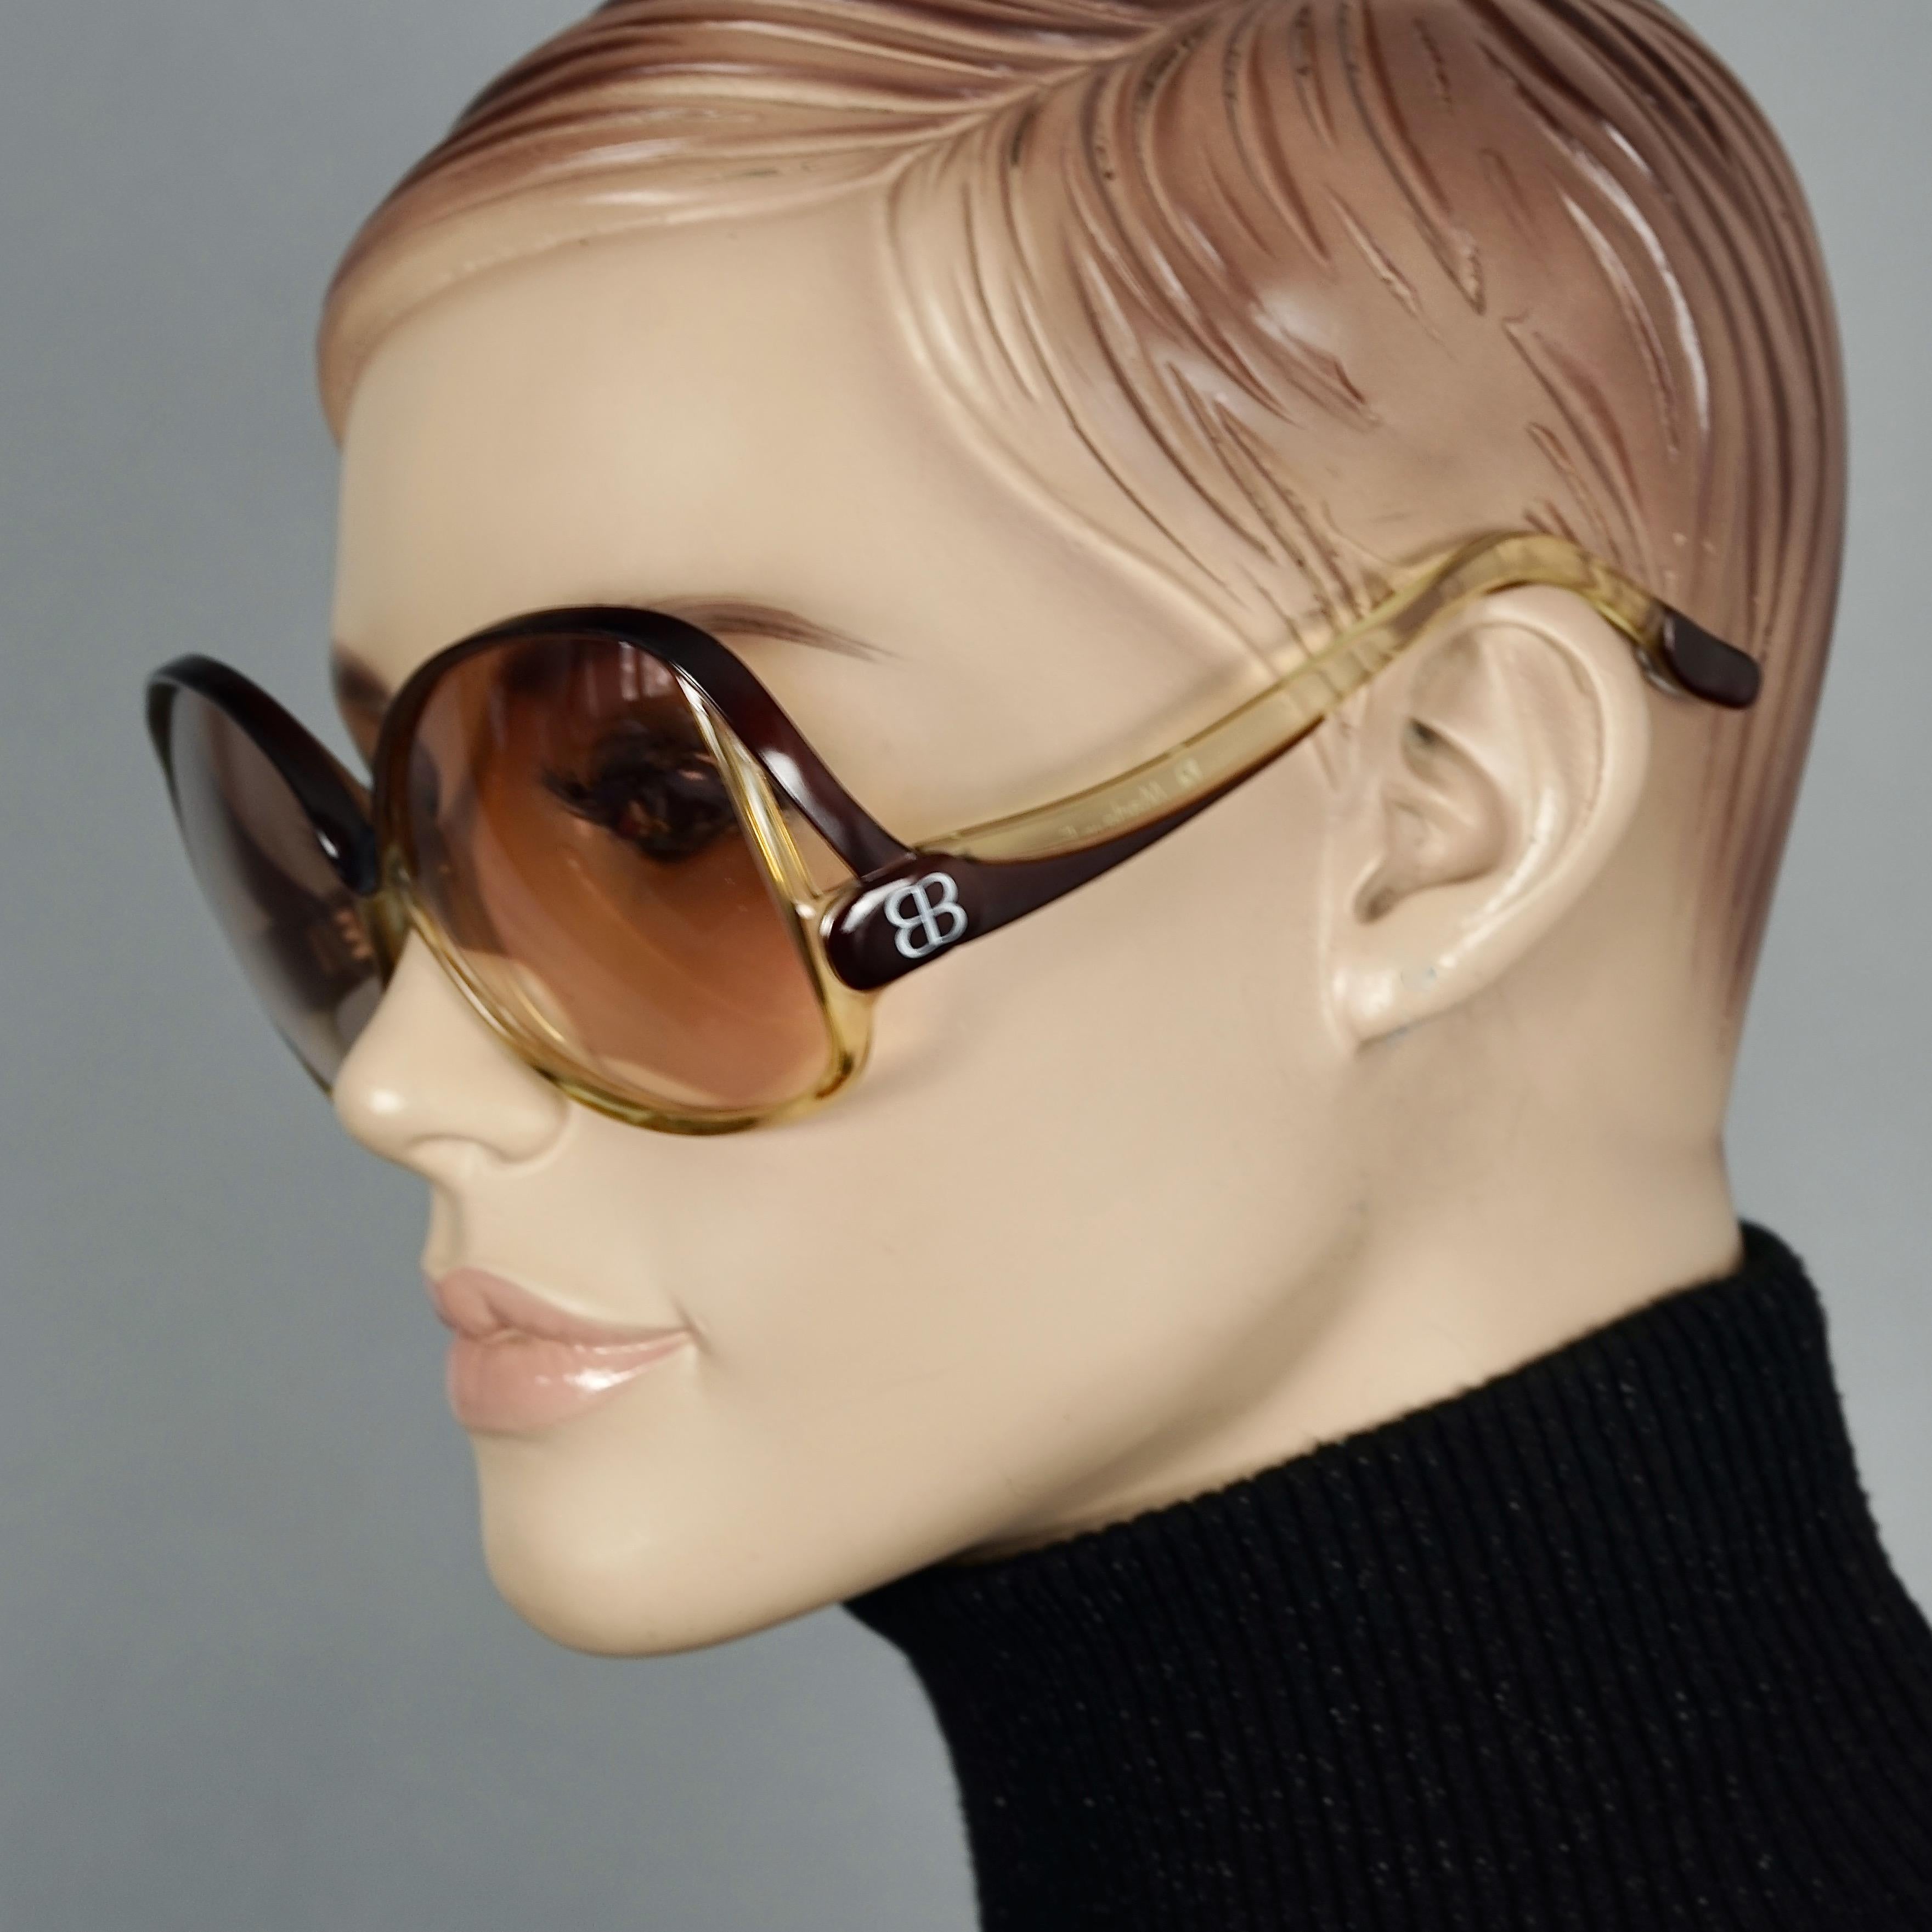 Vintage 1970s BALENCIAGA Oversized Two Tone Sunglasses

Measurements:
Lens Height: 2.48 inches (6.3 cm)
Horizontal Width: 5.55 inches (14.1 cm)
Arms: 4.72 inches (12 cm)

Features:
- 100% Authentic BALENCIAGA. 
- Two tone oversized sunglasses.
- BB